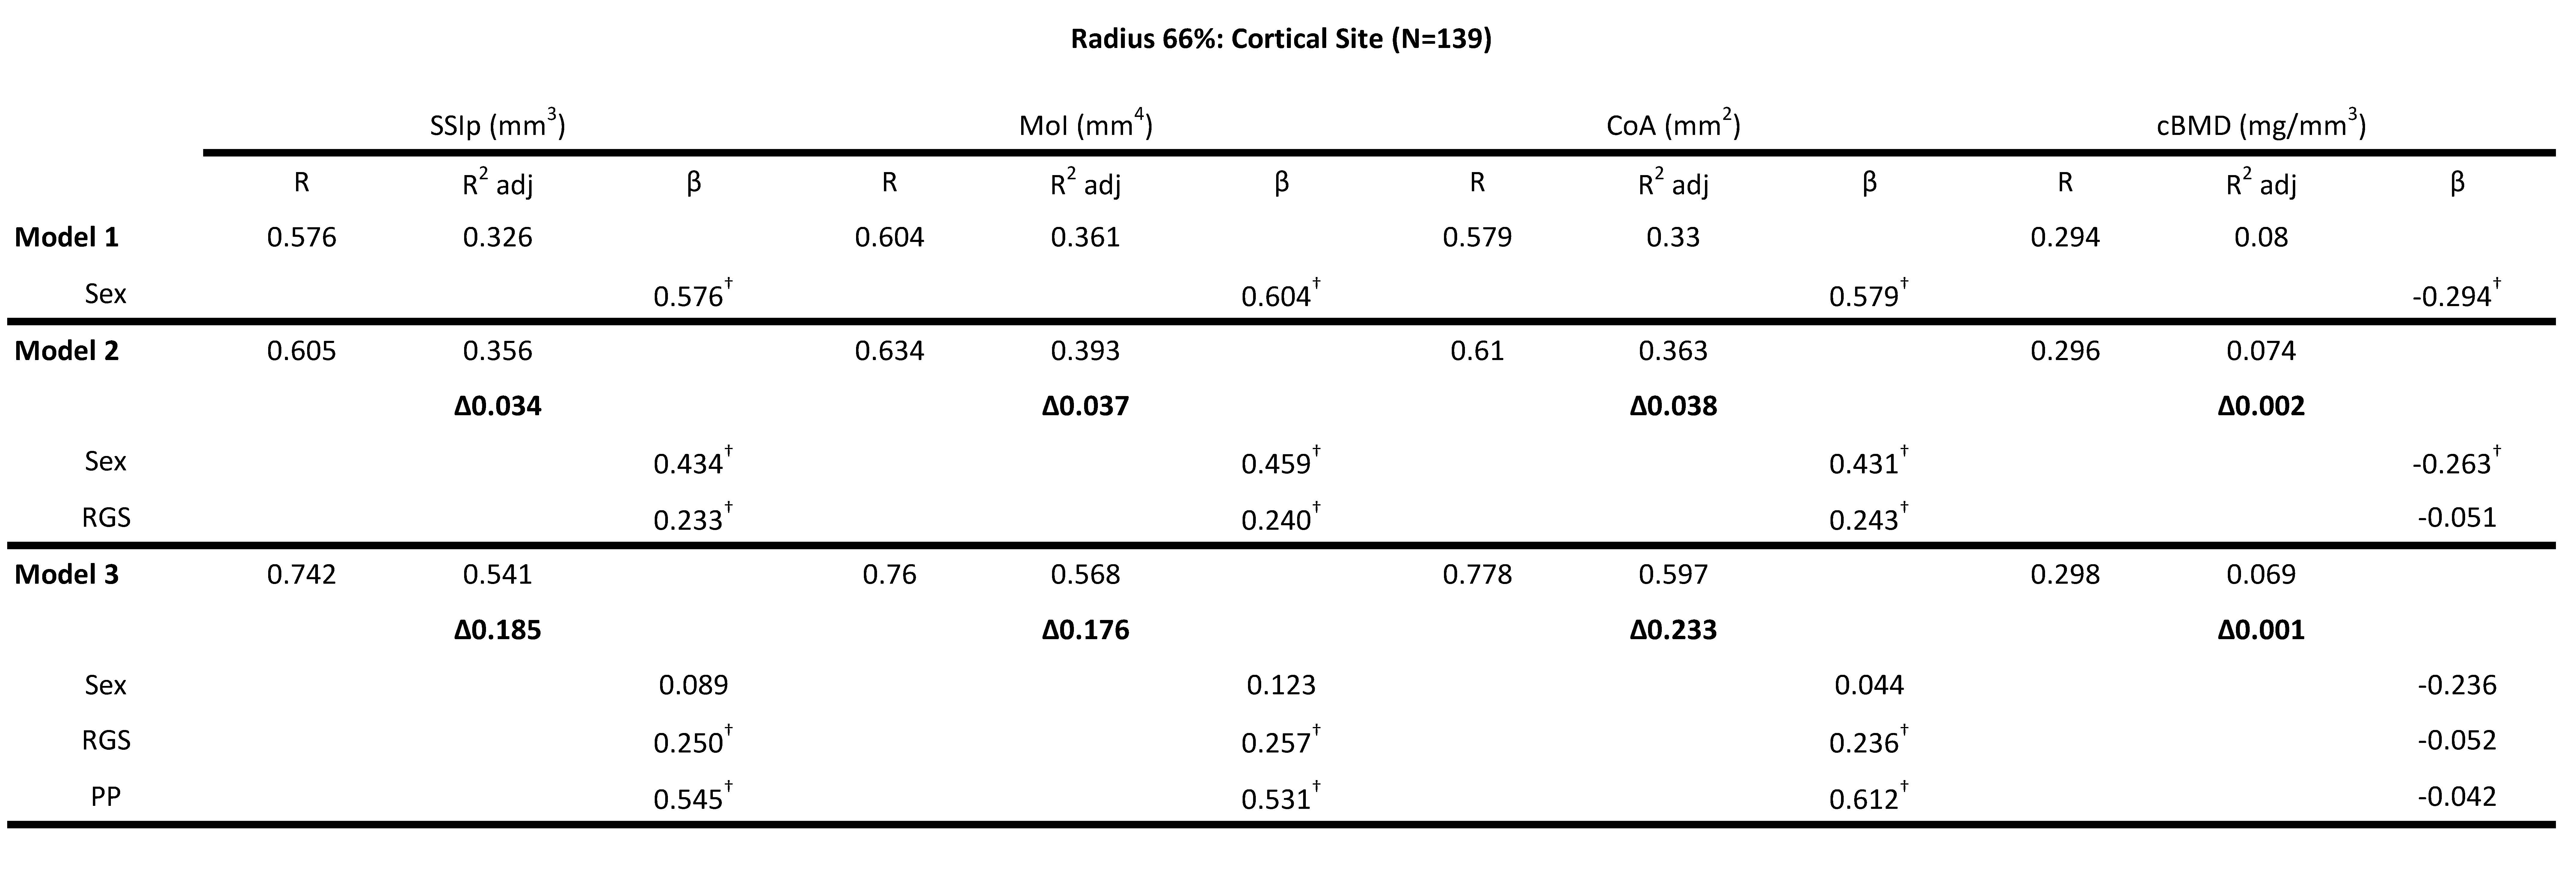 <b>Table 4</b>: Hierarchical multiple regression (HMR) analyses for predicting Bone Strength Index, SSIp (mm<sup>3</sup>)- Strength Strain Index, MoI (mm<sup>4</sup>)- polar Moment of inertia, CoA (mm<sup>2</sup>- Cortical Area, cBMD (mg/mm<sup>3</sup>)-Cortical Bone Mineral Density at the 66\% radial site using sex, relative grip strength (RGS) and peak power (PP) as predictor variables. &beta; is the Standardized beta coefficient indicates the predictive power. Adjusted coefficient of determination (R<sup>2</sup> Adj) provides the amount of variation explained by the regression model. &Delta; indicates change in R<sup>2</sup> from model 1 (bold). &dagger; Indicates a significant &beta;